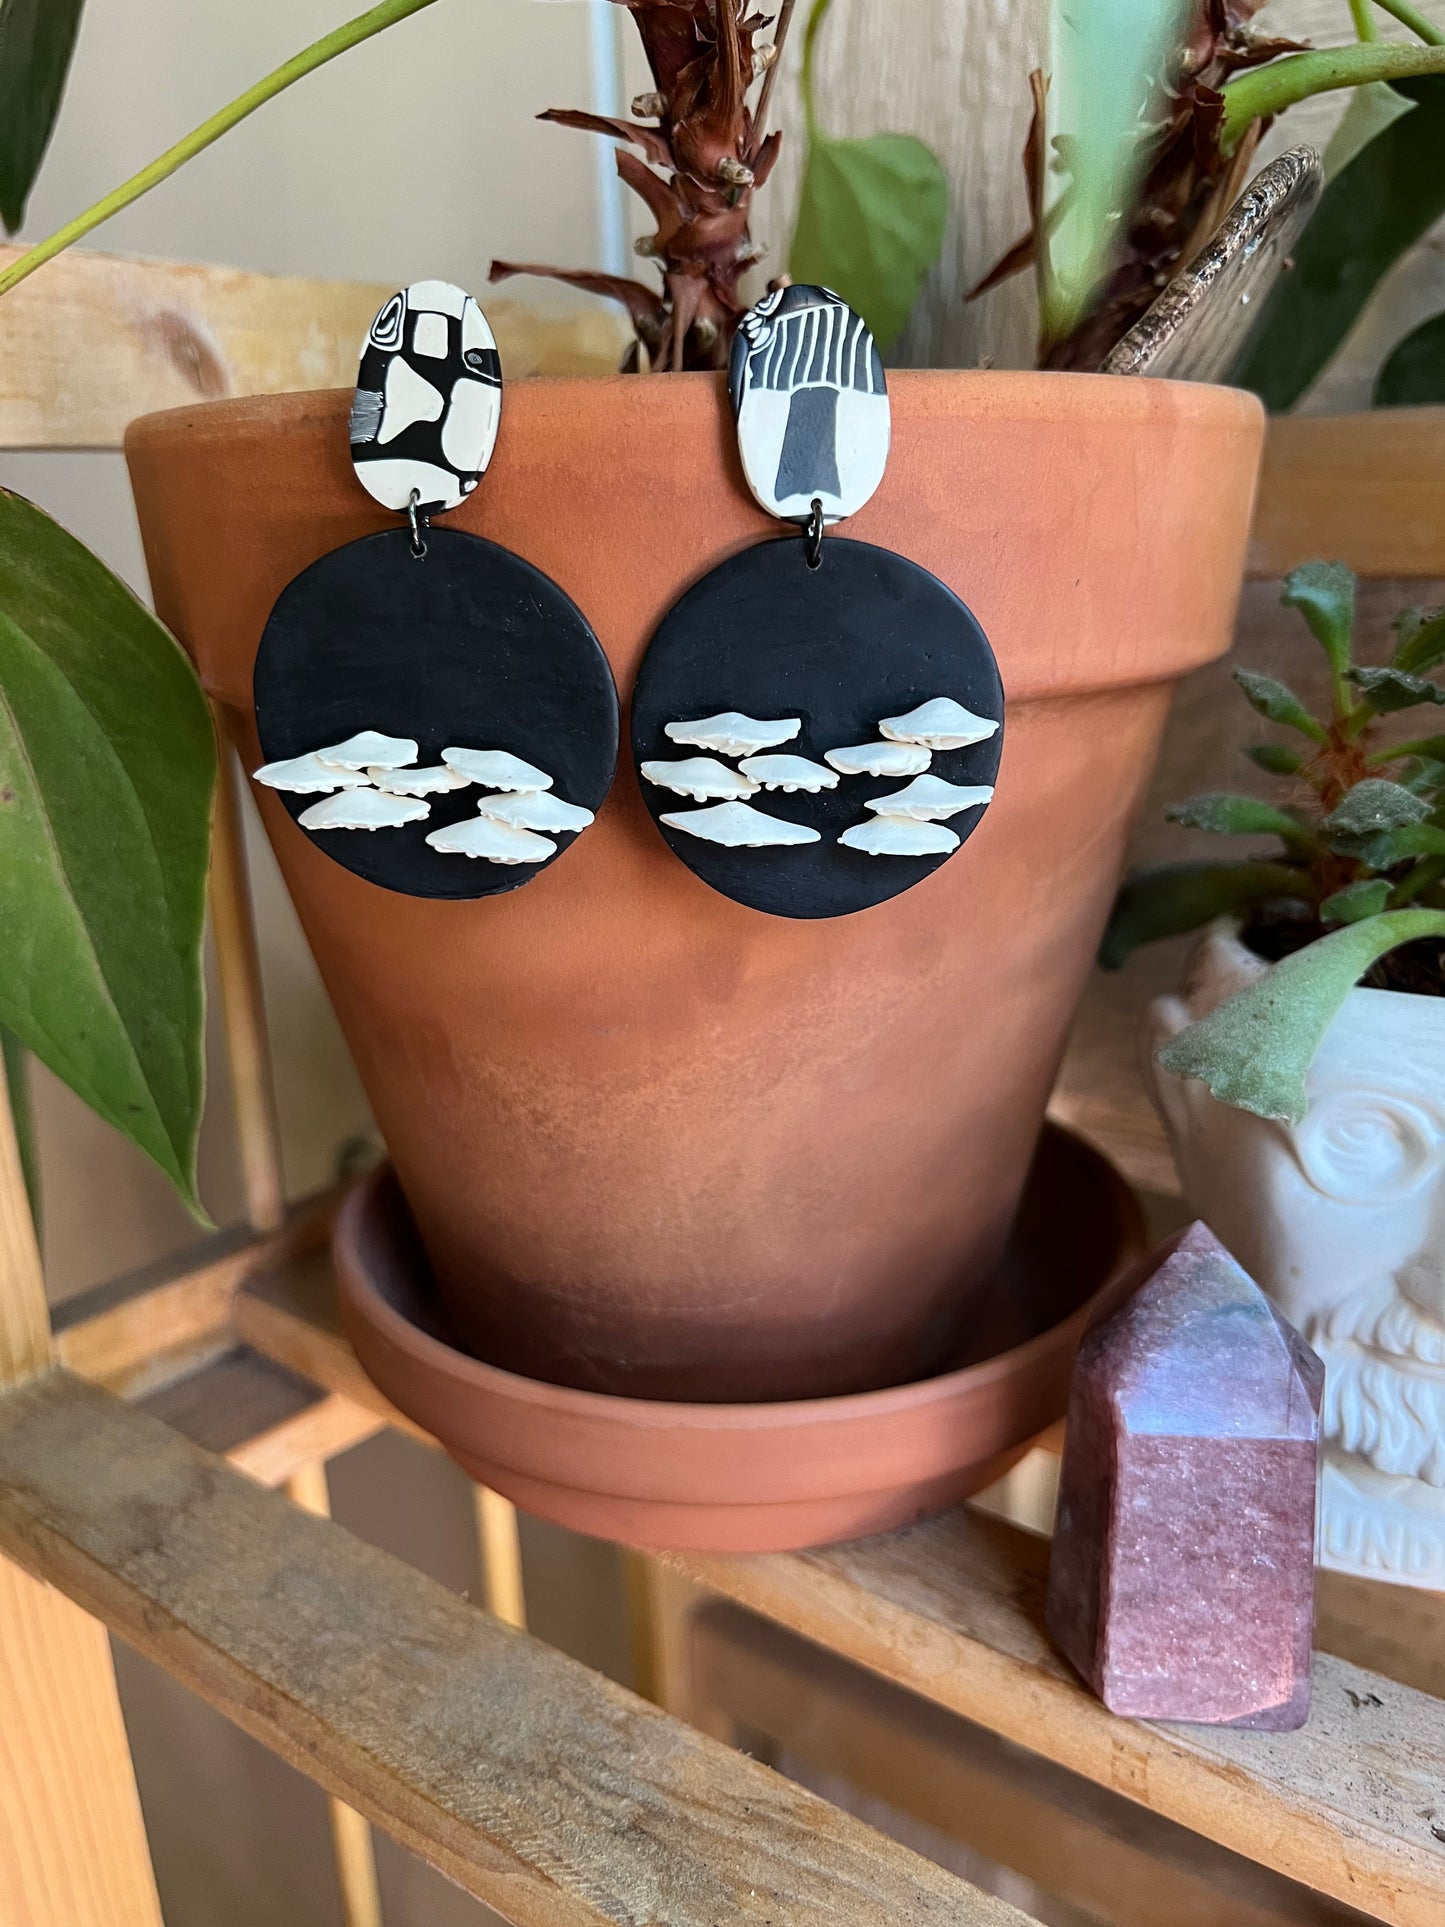 nfuse your style with natural charm wearing our polymer clay chicken of the woods mushroom earrings. These whimsical accessories capture the beauty of nature, adding a playful touch to any outfit. Embrace organic elegance with these unique statement earrings.